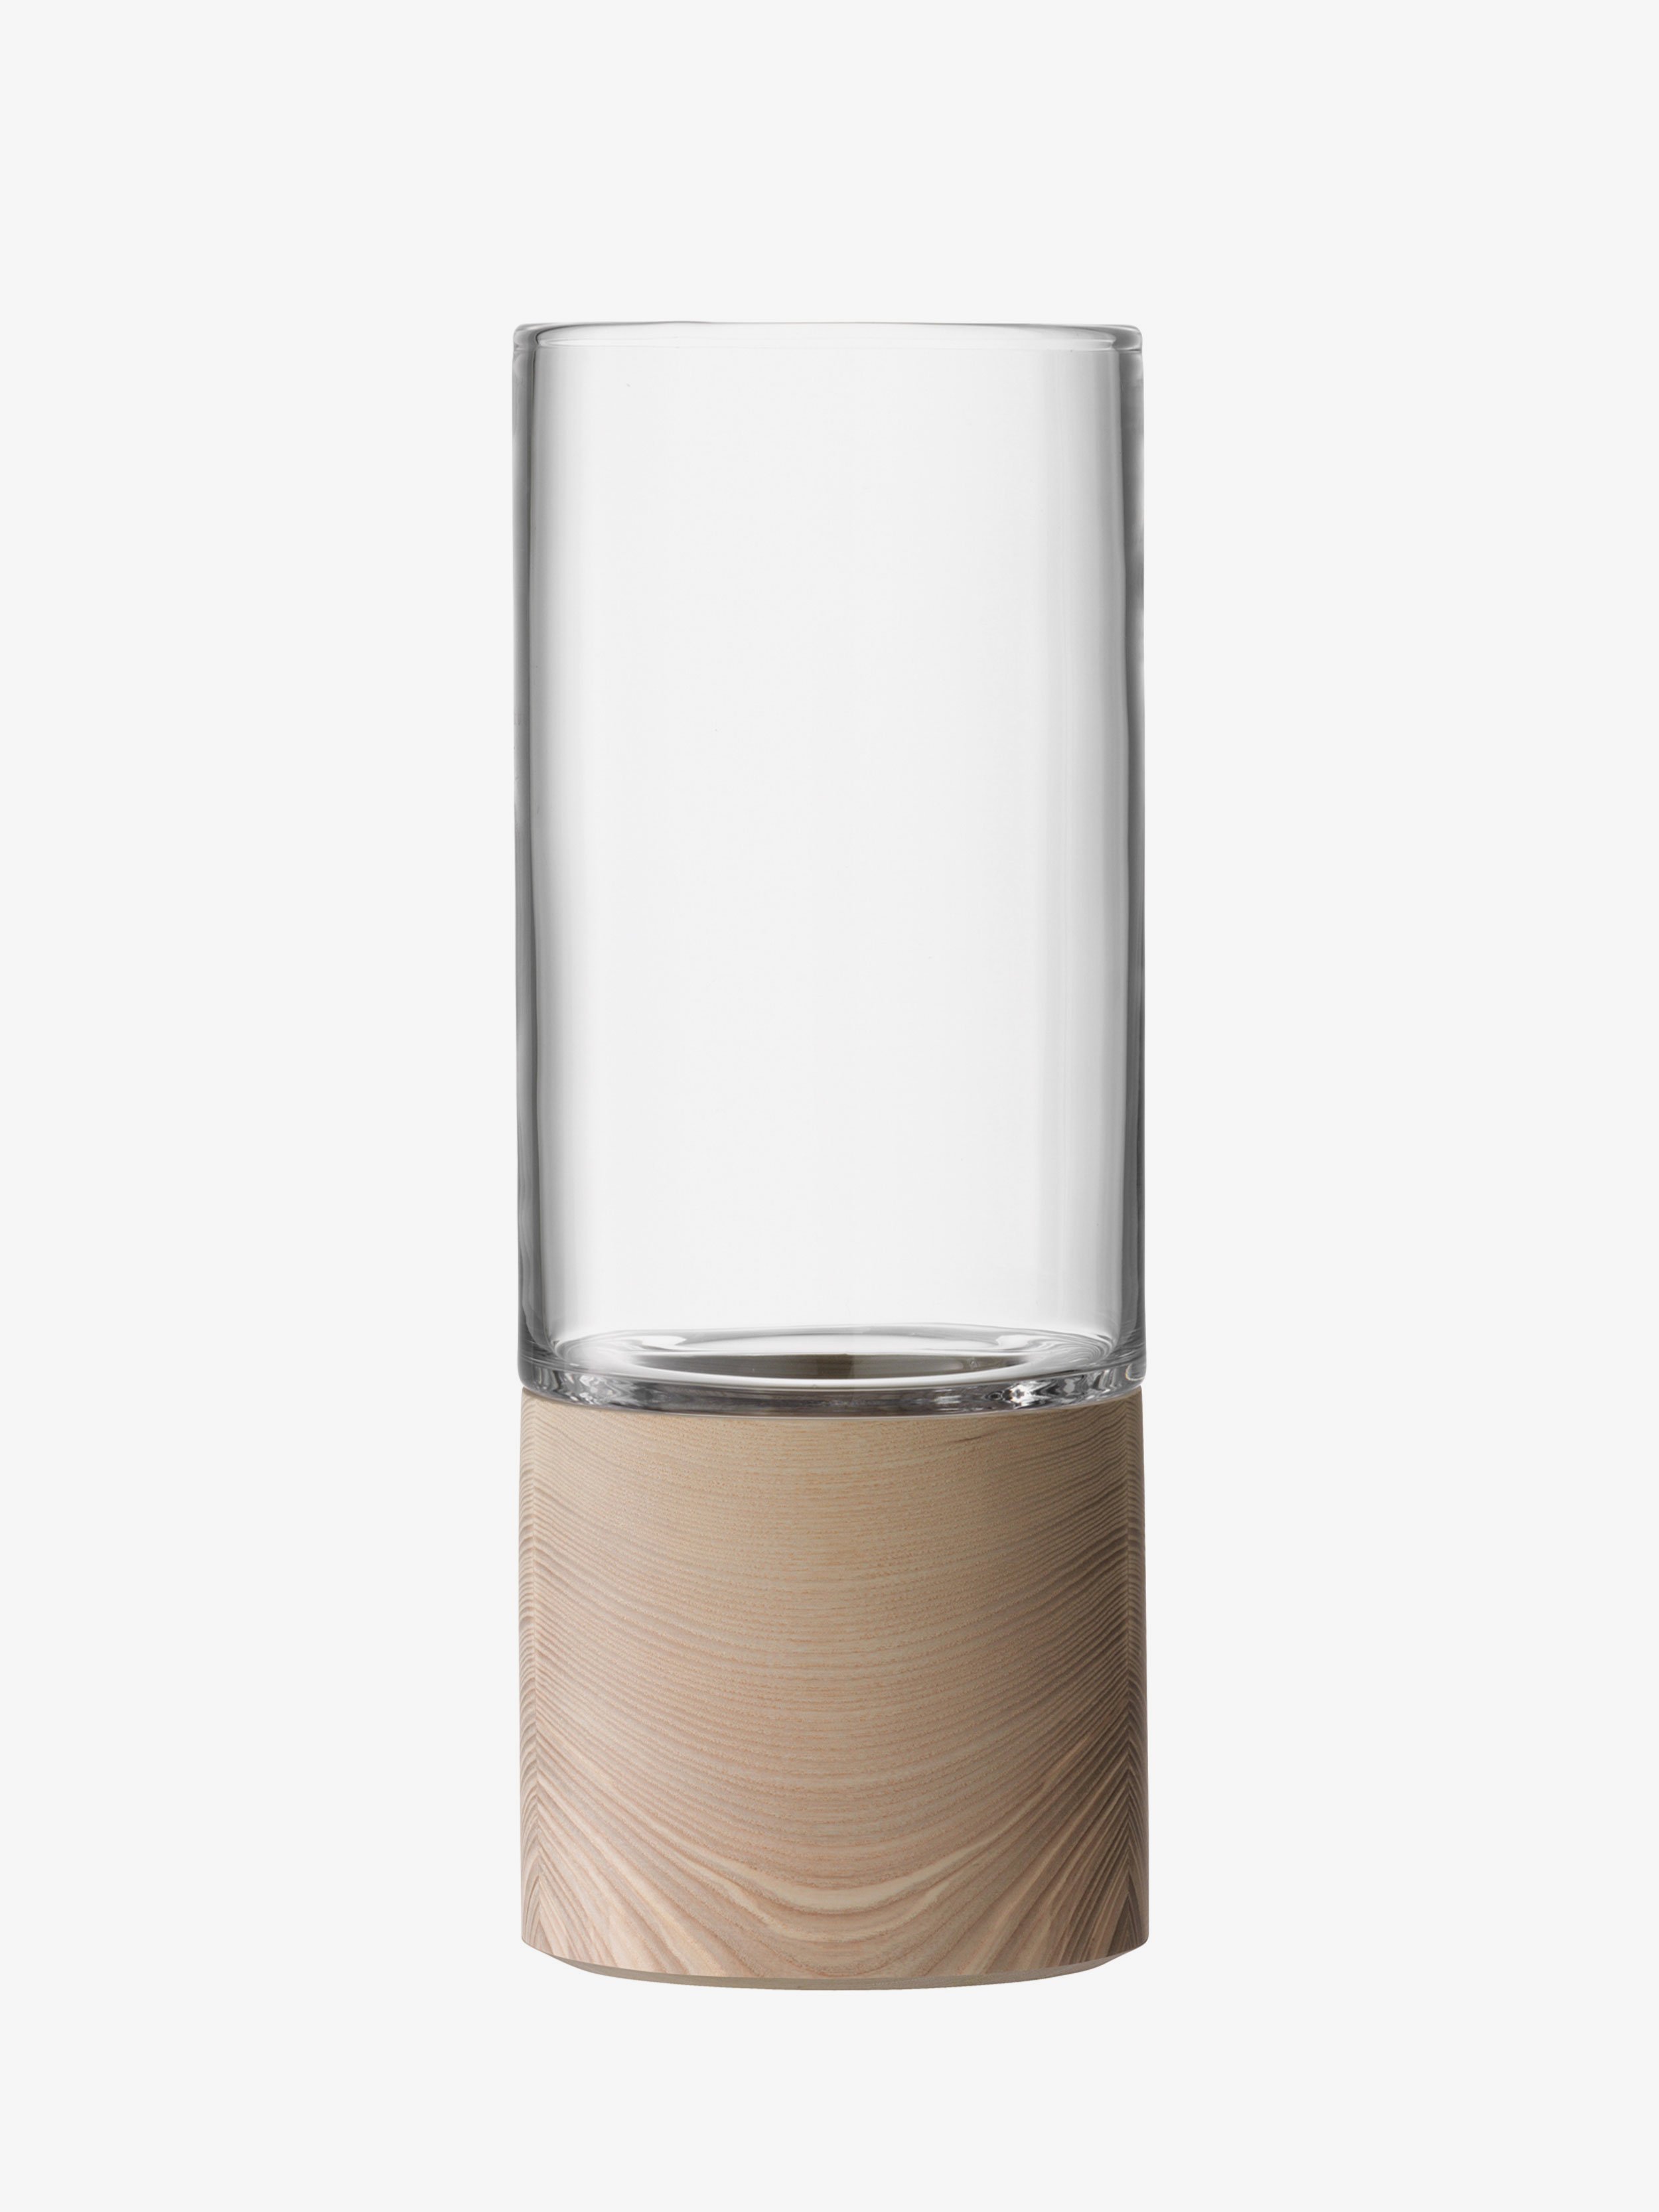 Vase H14.25in, Clear | Lotta Collection | LSA Interior